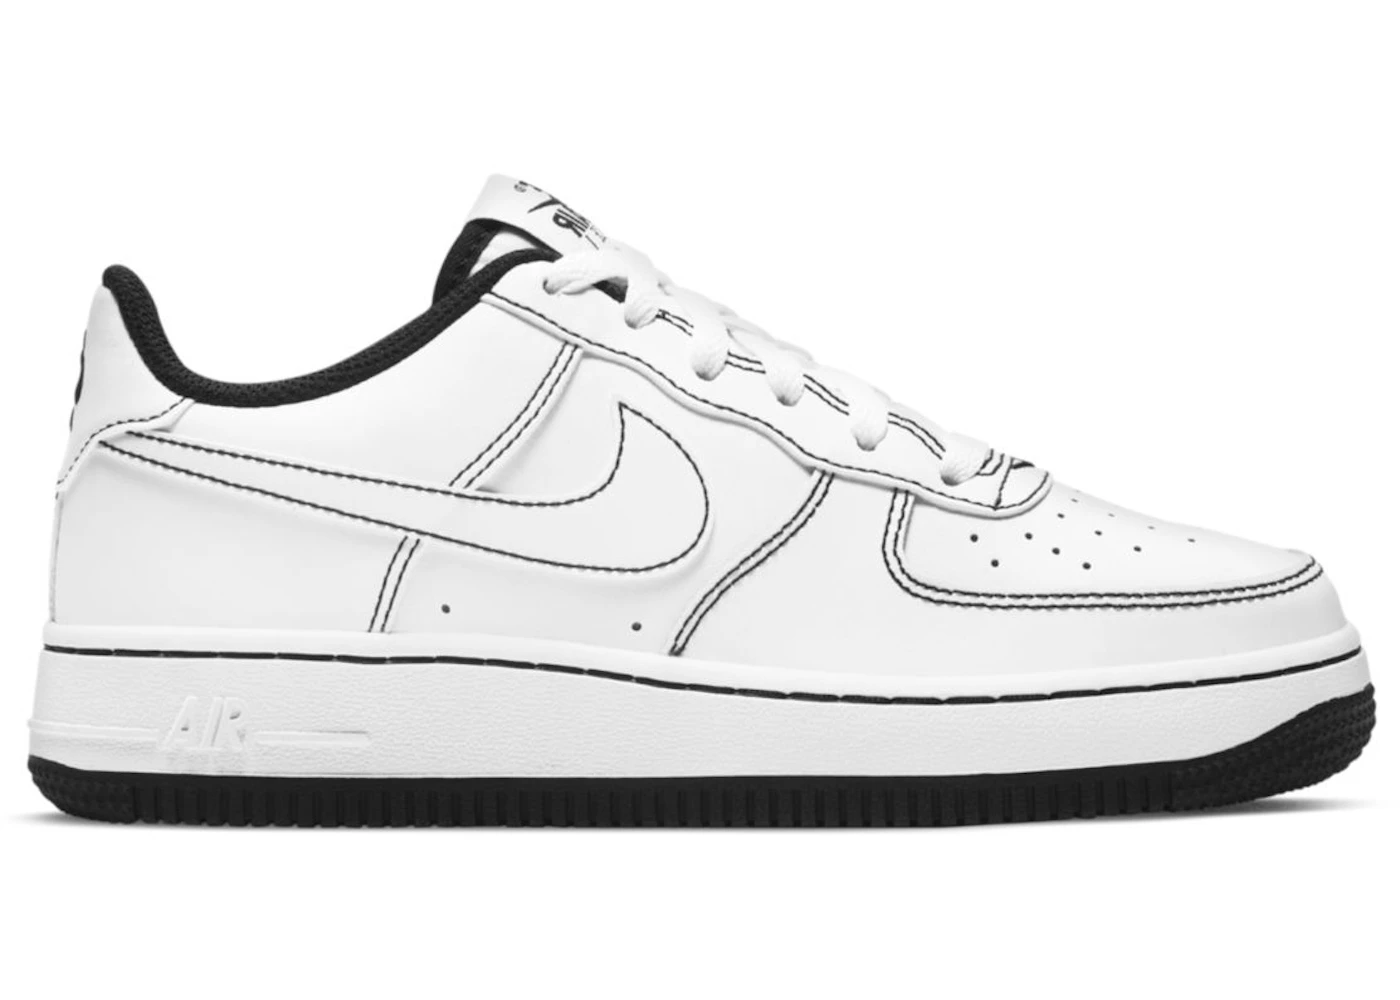 Look Out For The Nike Air Force 1 '07 LV8 NBA White Black •